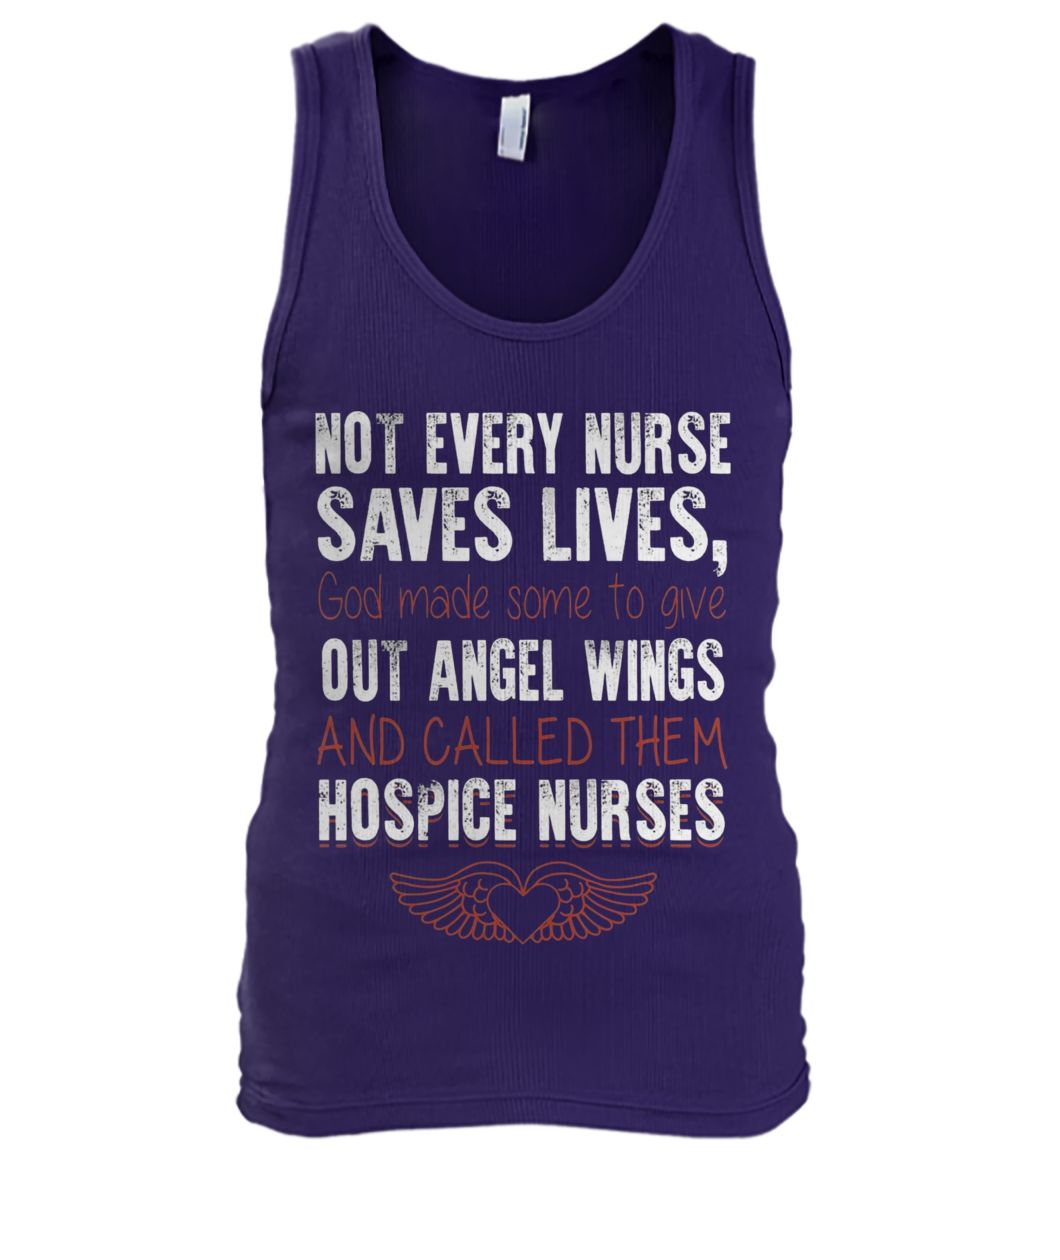 Not every nurse saves lives god made some to give out angel wings men's tank top